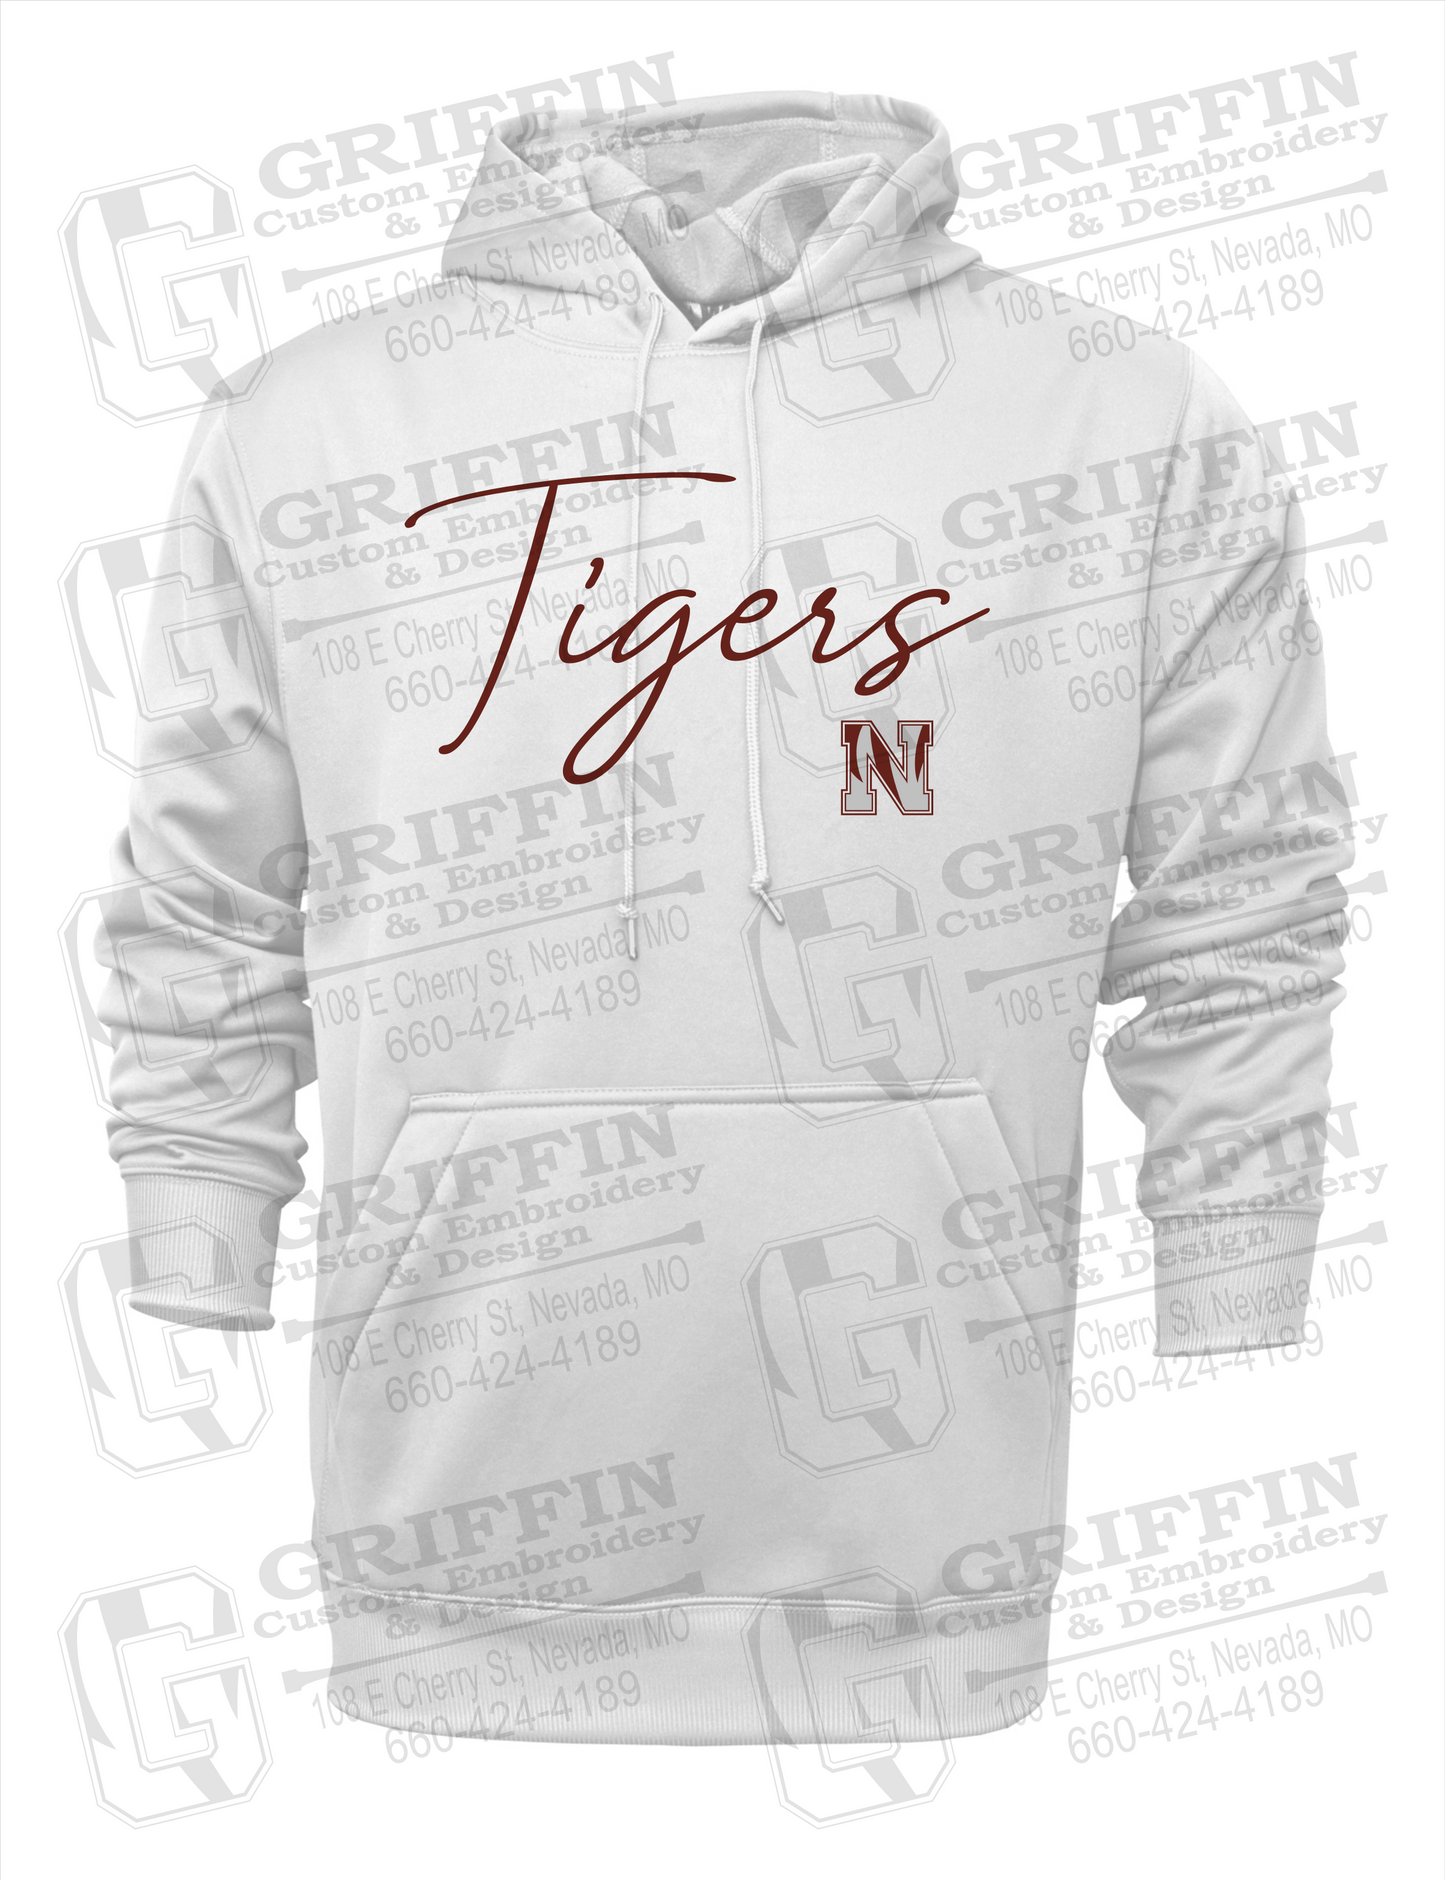 Nevada Tigers 23-A Youth Hoodie